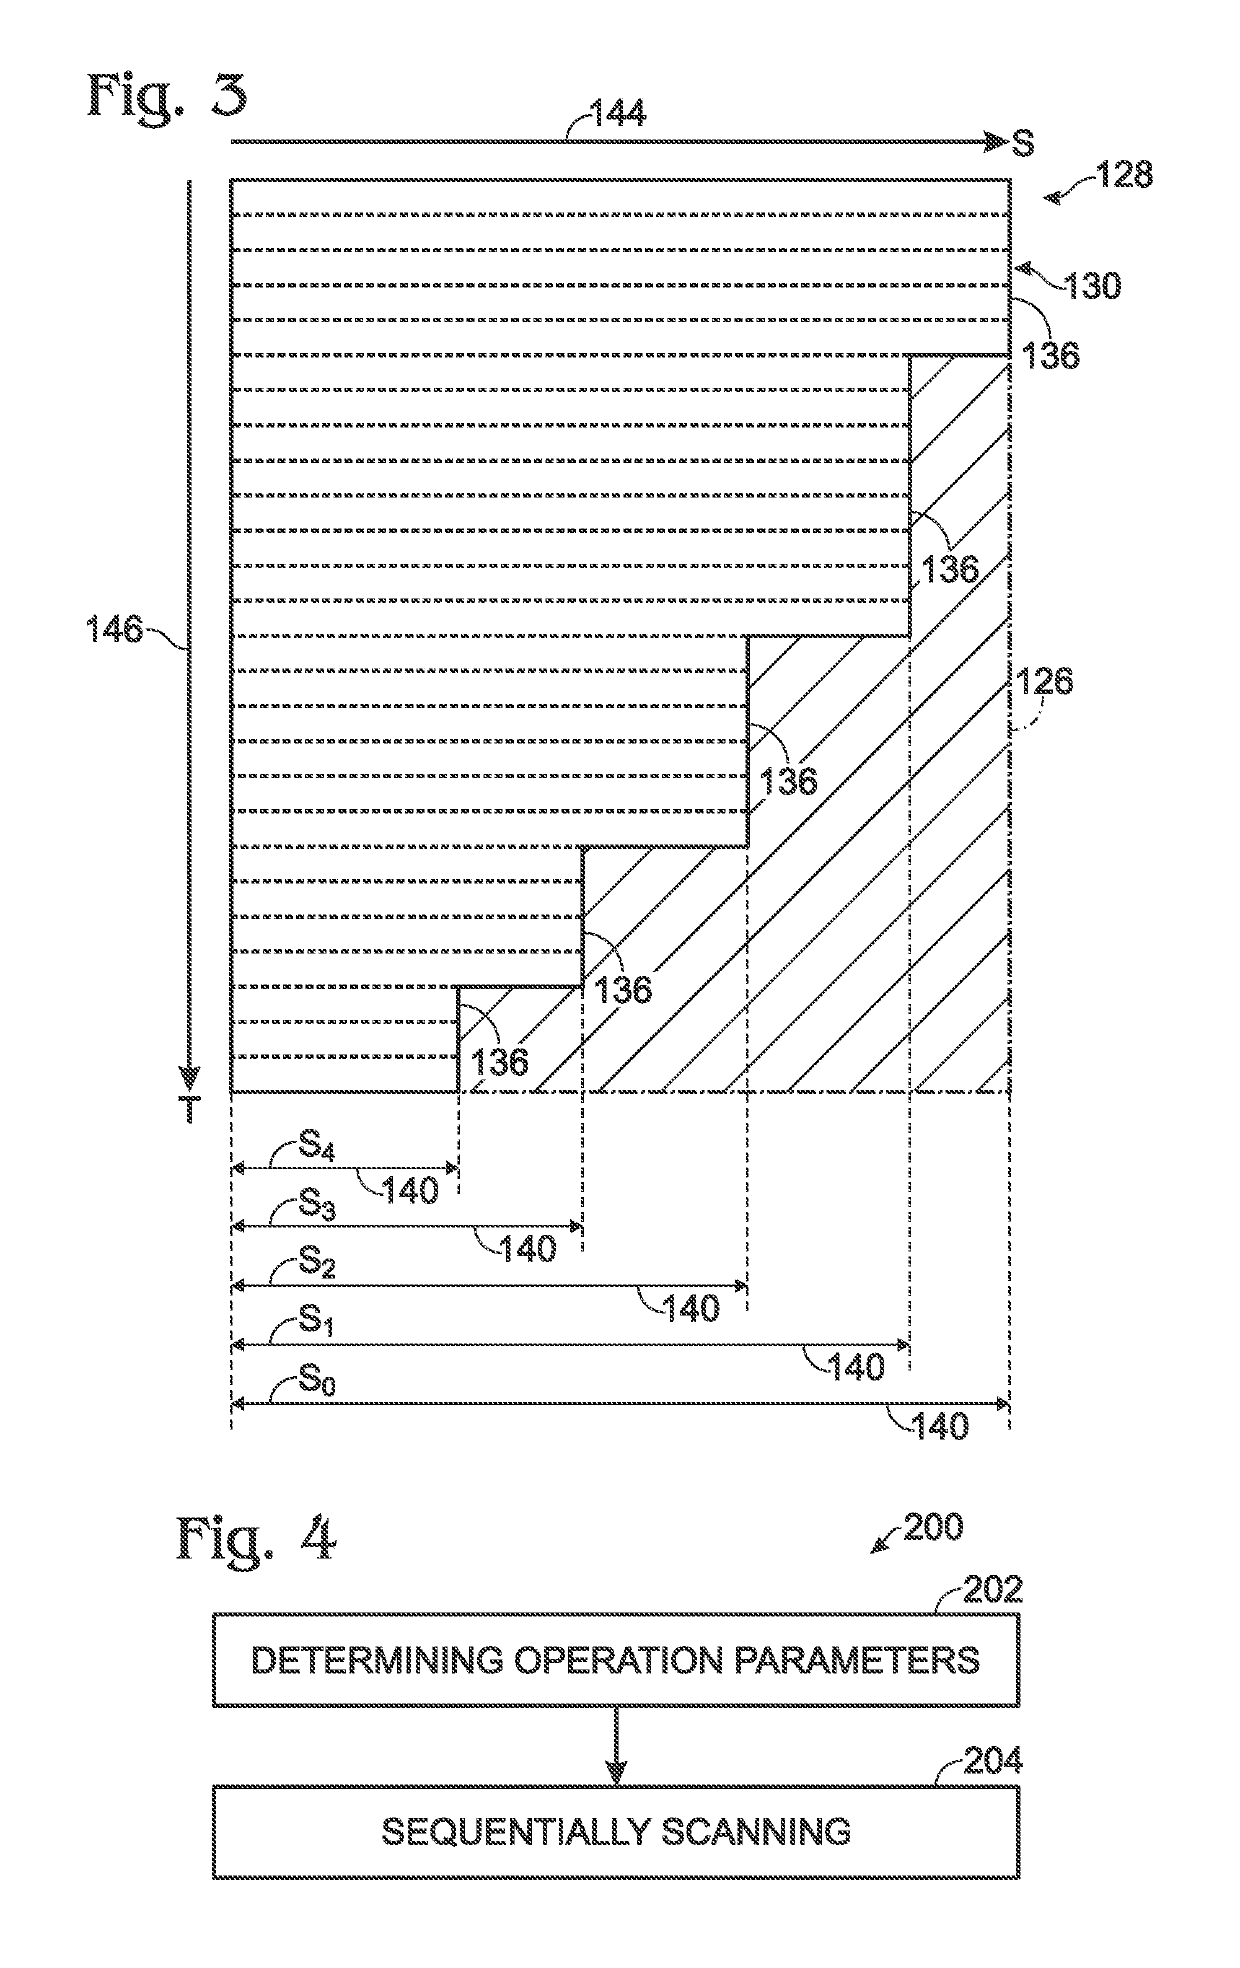 Large-area selective ablation methods